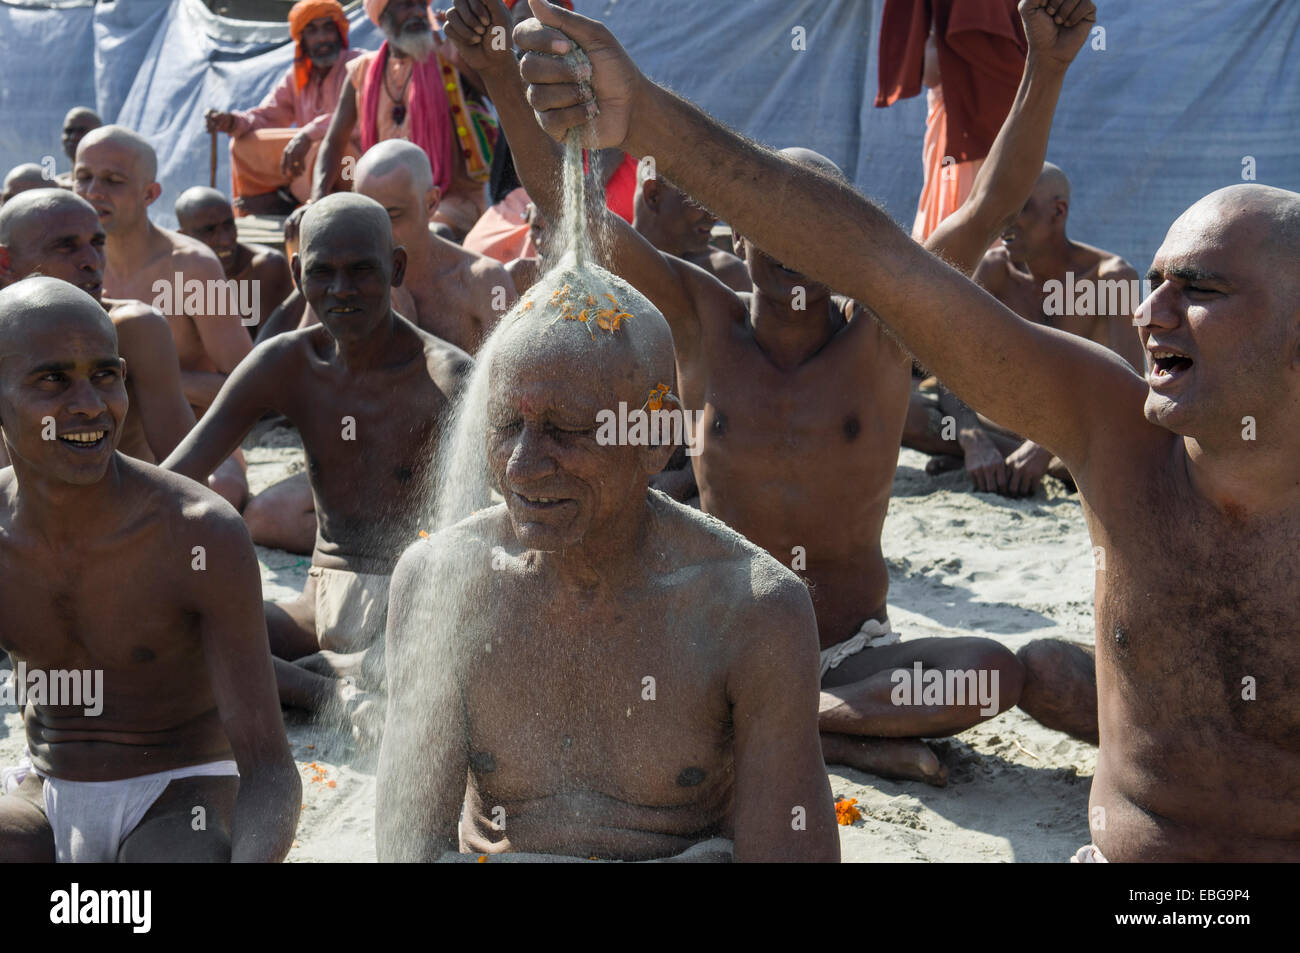 Man putting sand on the head of a another man joining the initiation of new sadhus, during Kumbha Mela festival, Allahabad Stock Photo